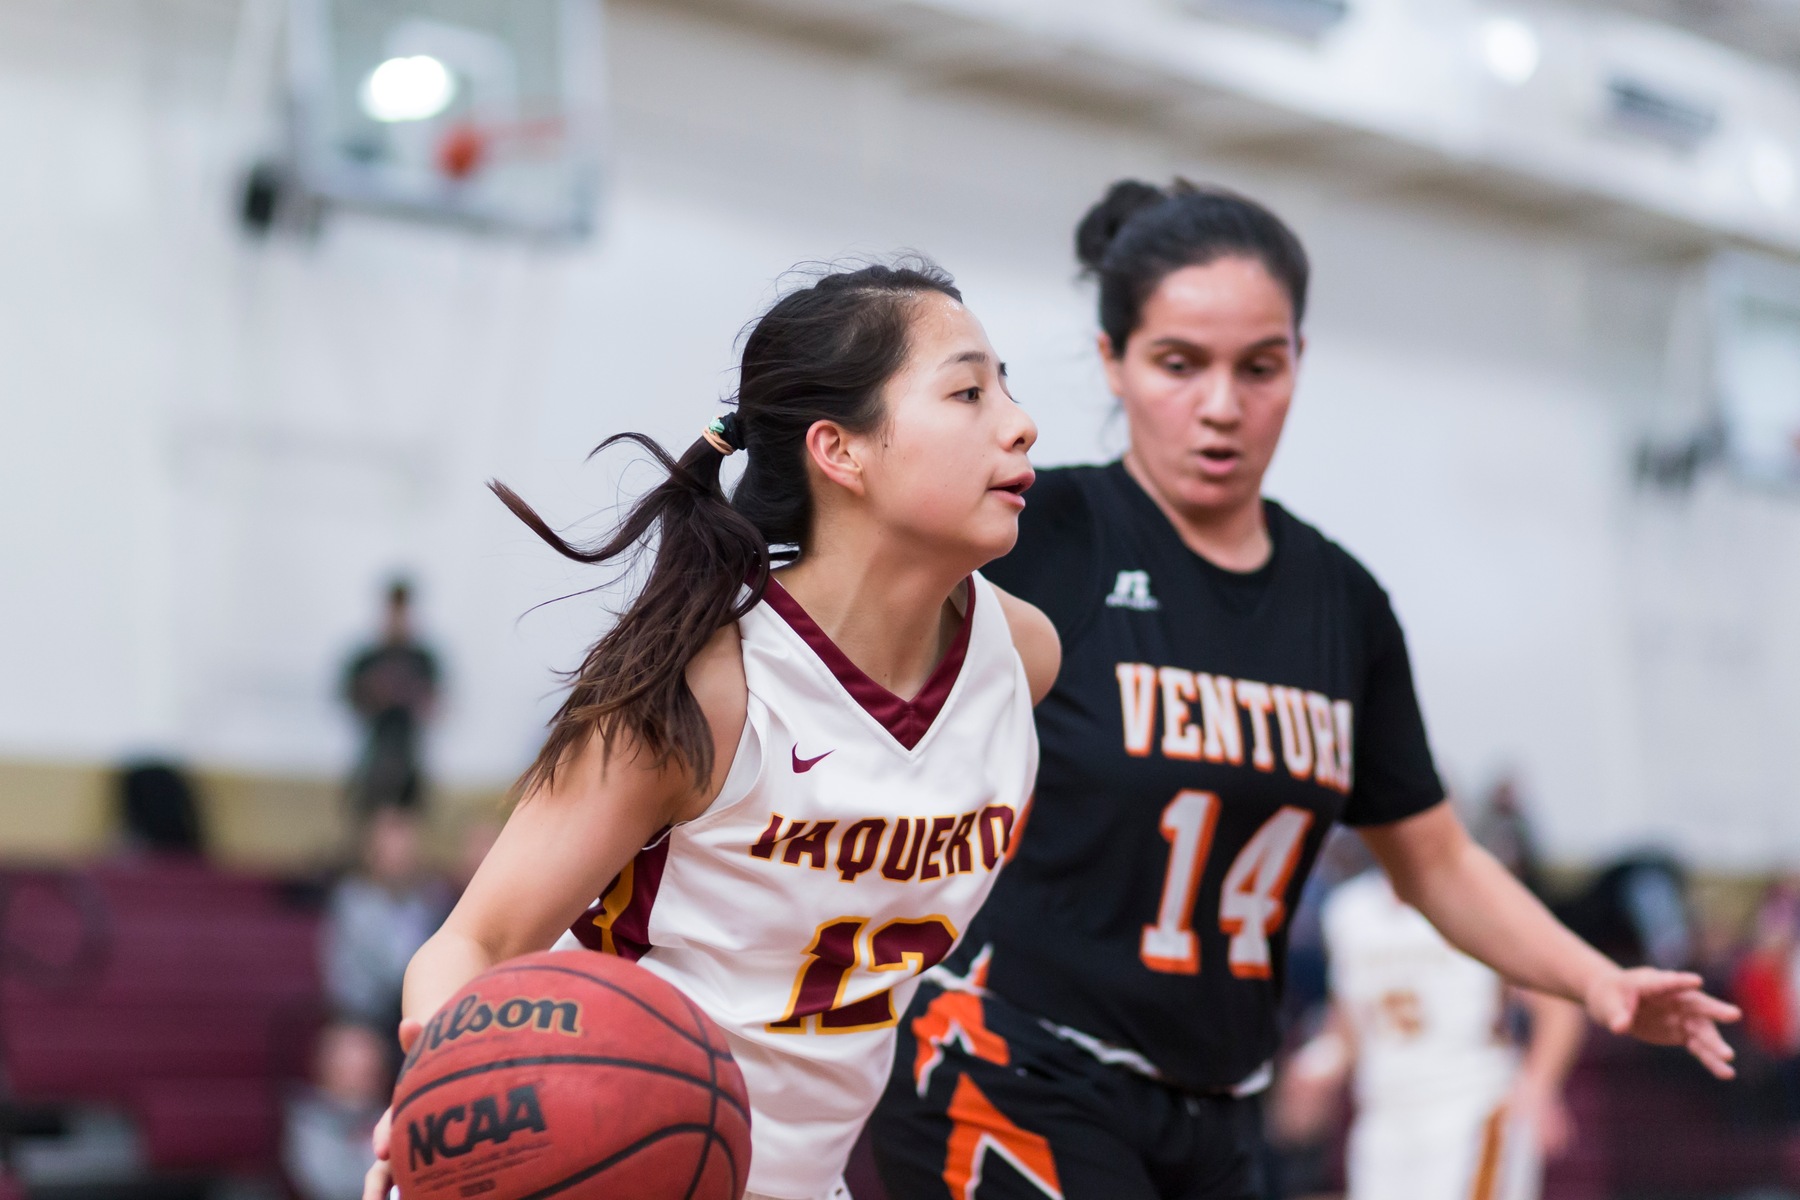 GCC Women's Basketball upsets No. 1 team in the state Ventura College, 57-50 Friday Dec. 20